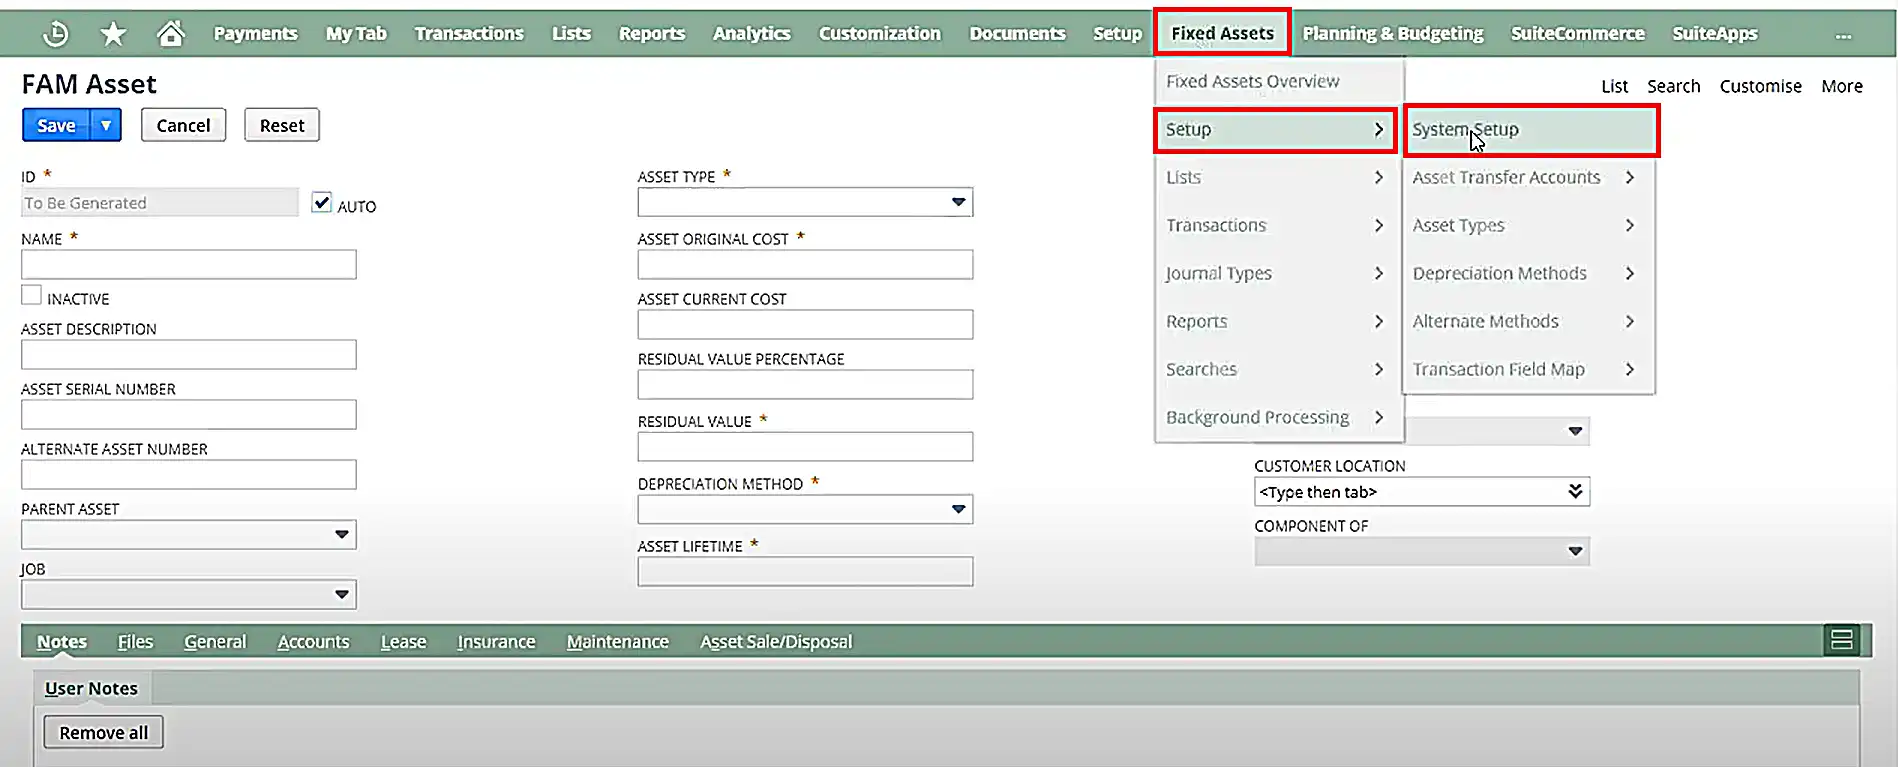 Importing Existing Asset Data into NetSuite